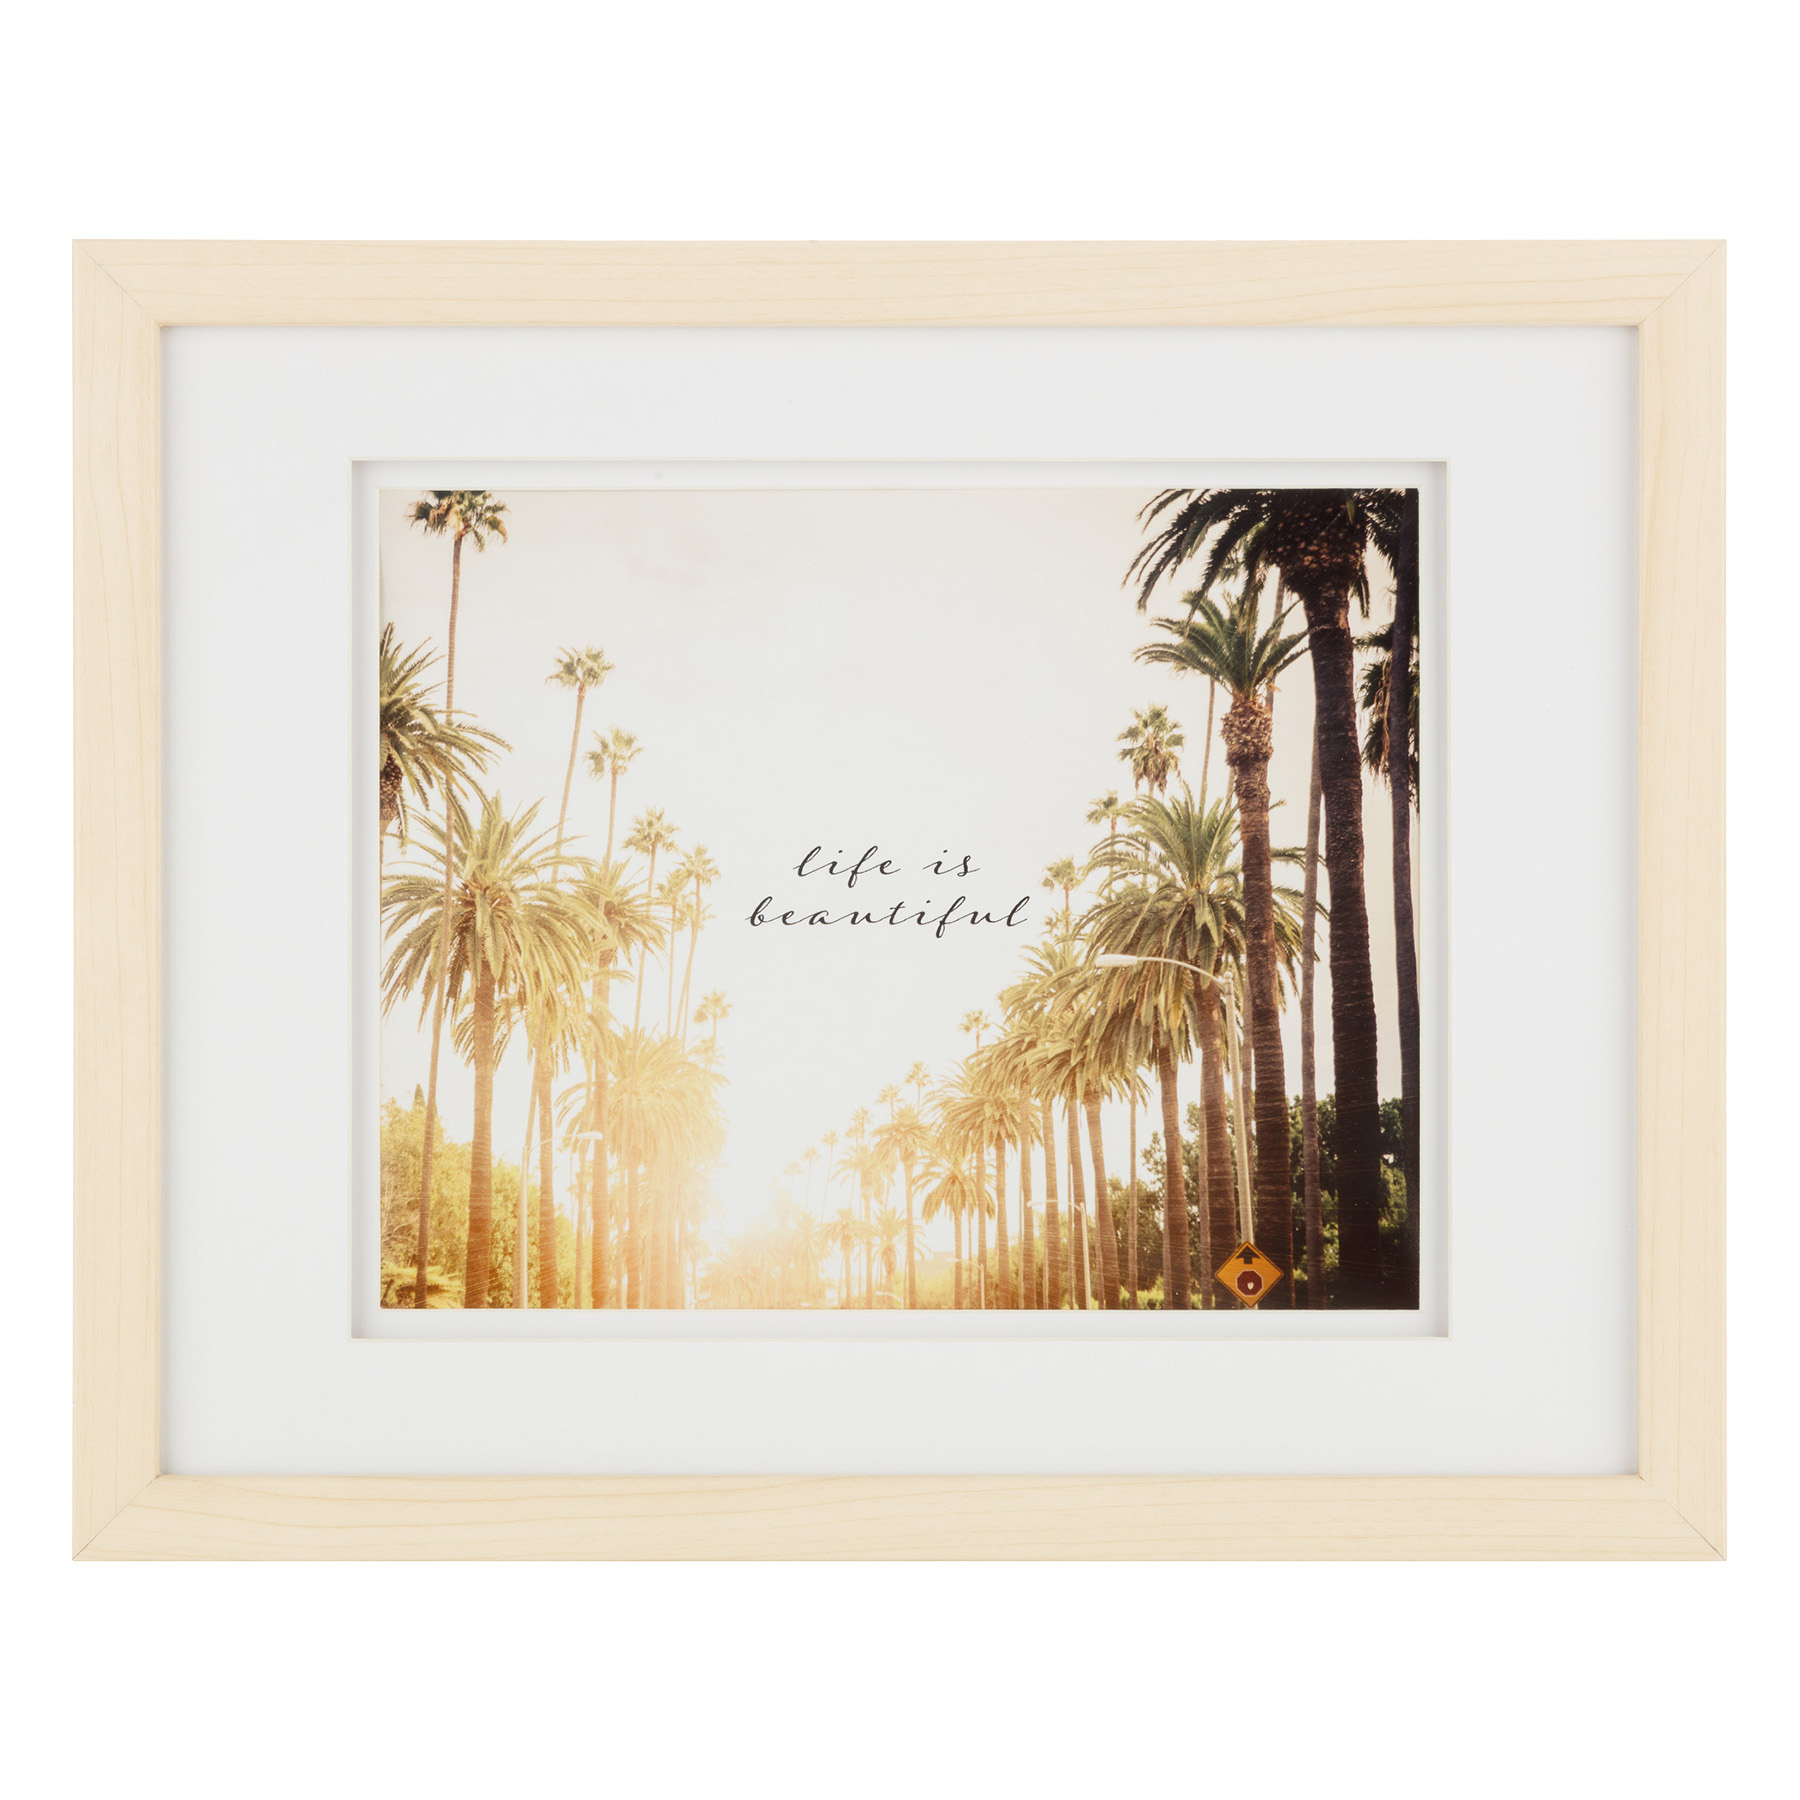 Pick Mix 14x20 Matted To 11x14 Thin Linear Wall Frame,, 54% OFF